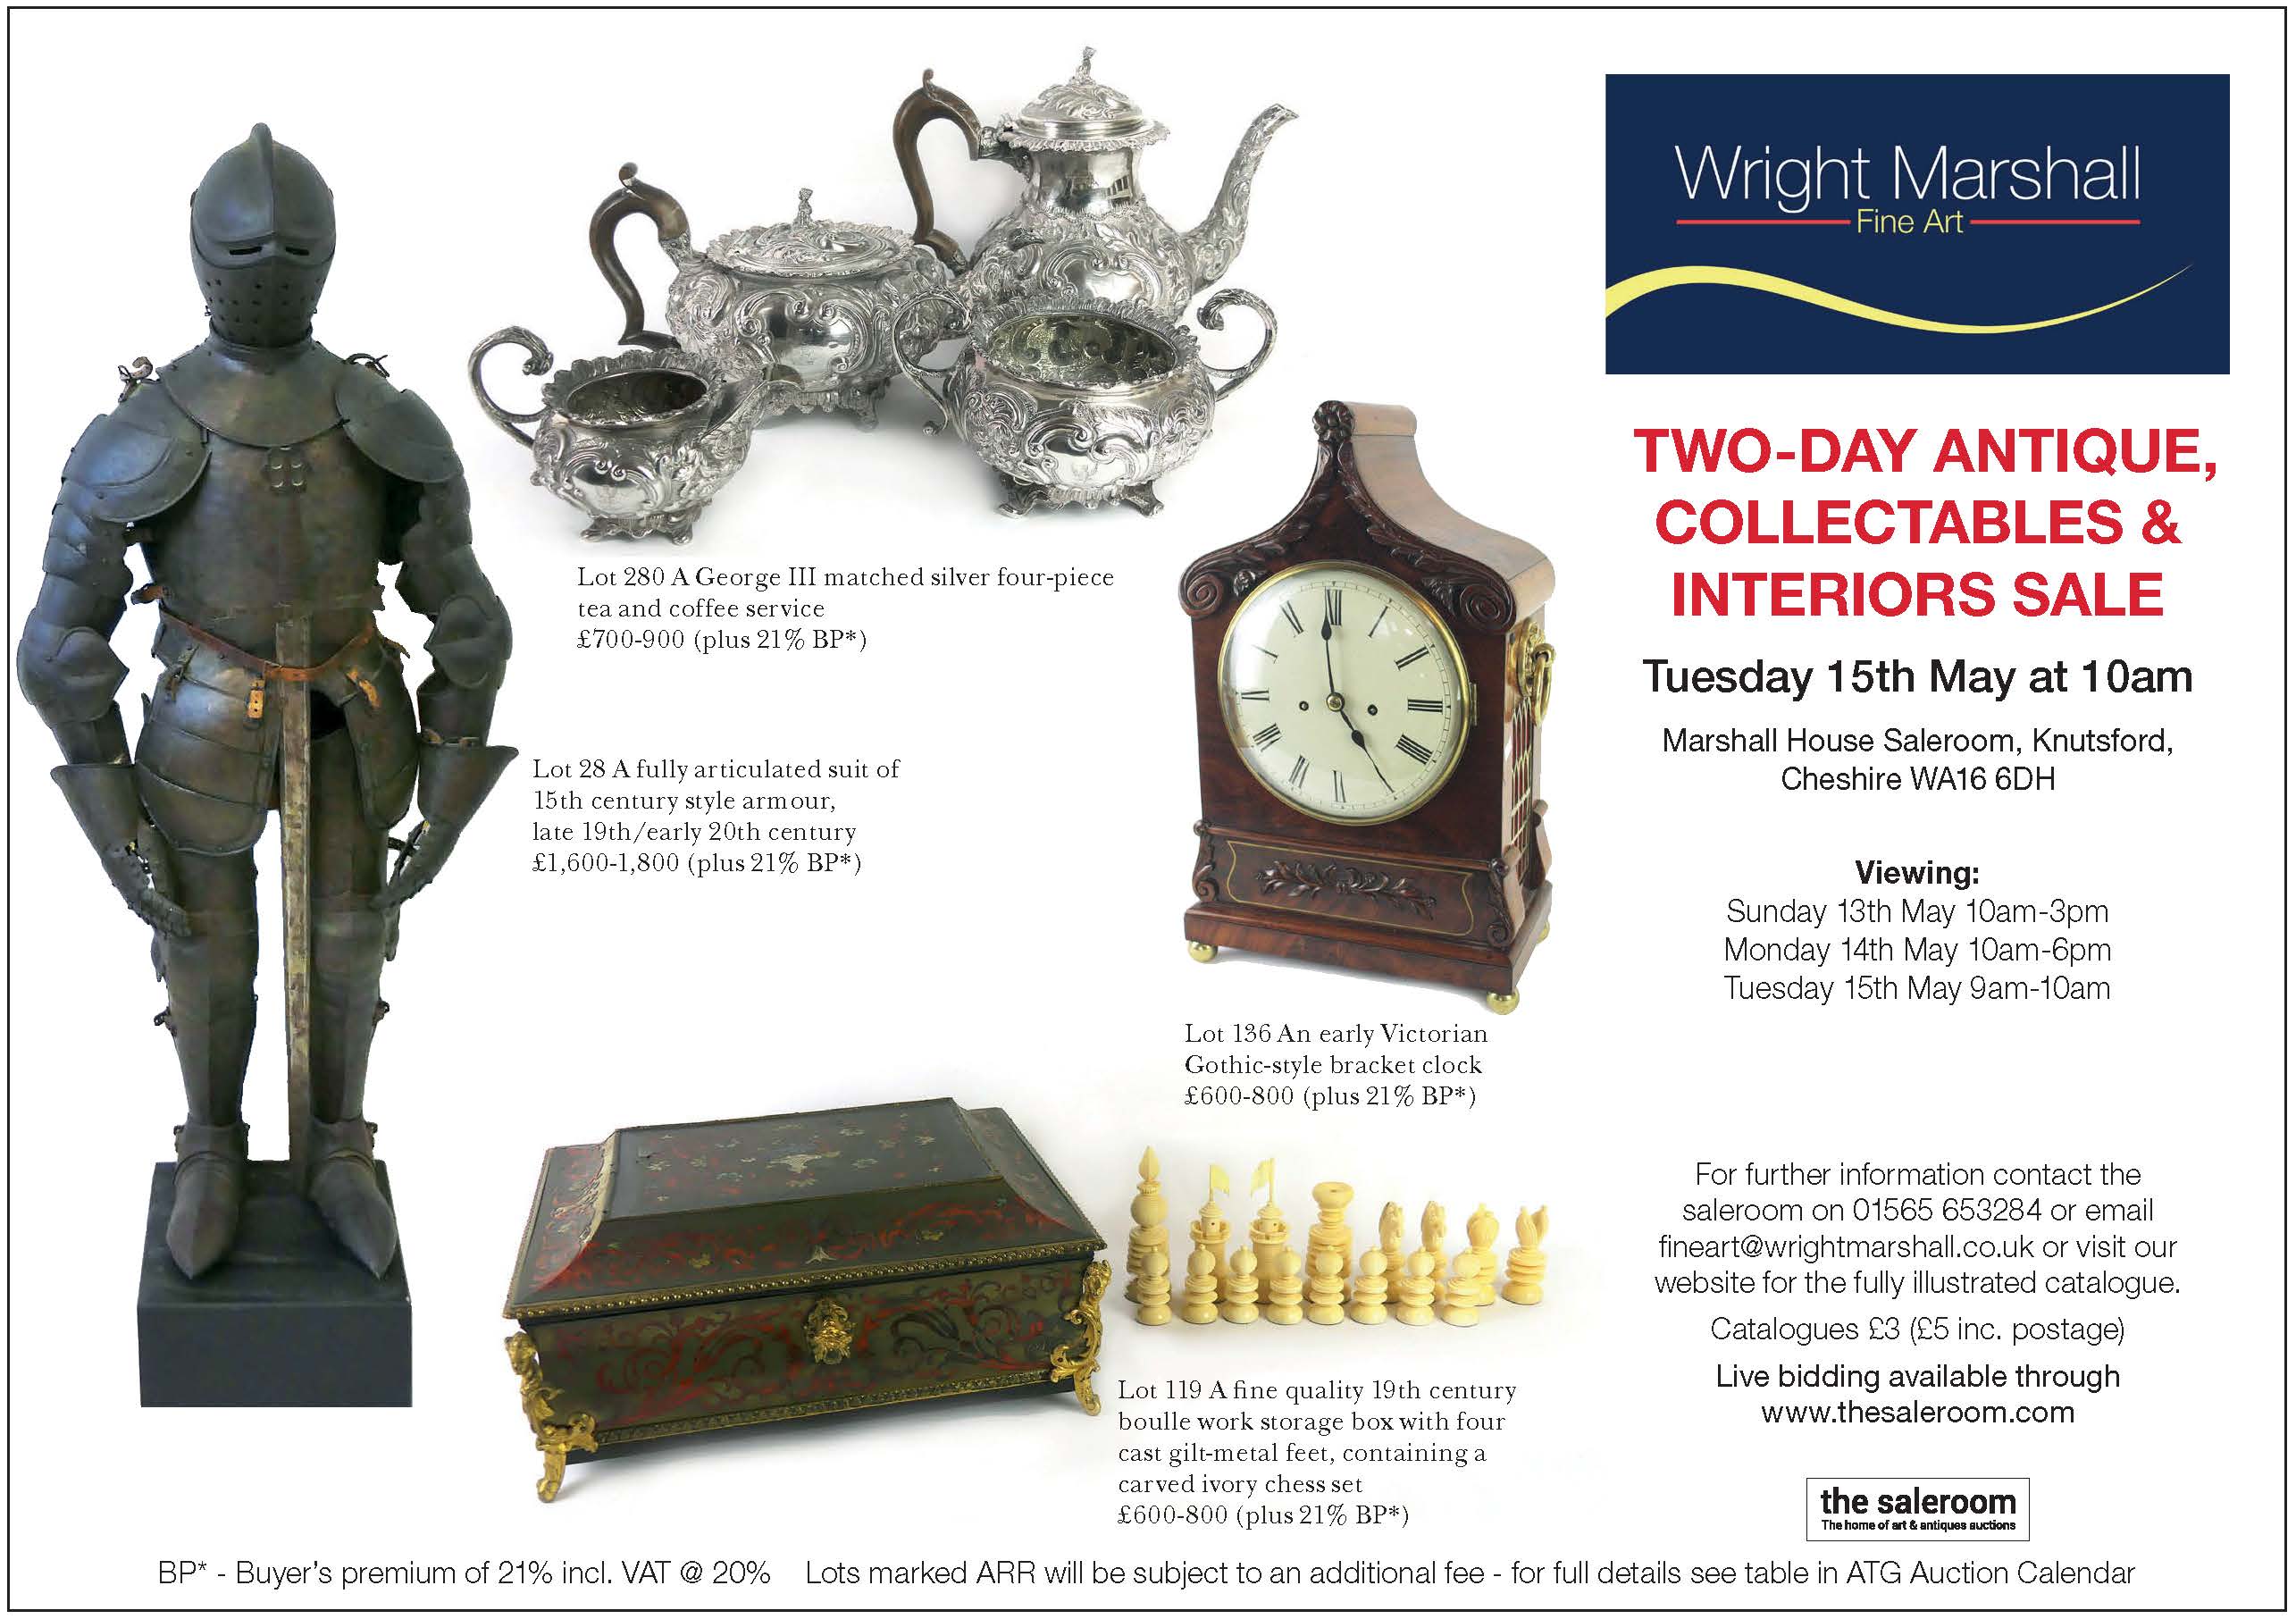 Wright Marshall- Antique, Collectables & Interiors Sale.jpg